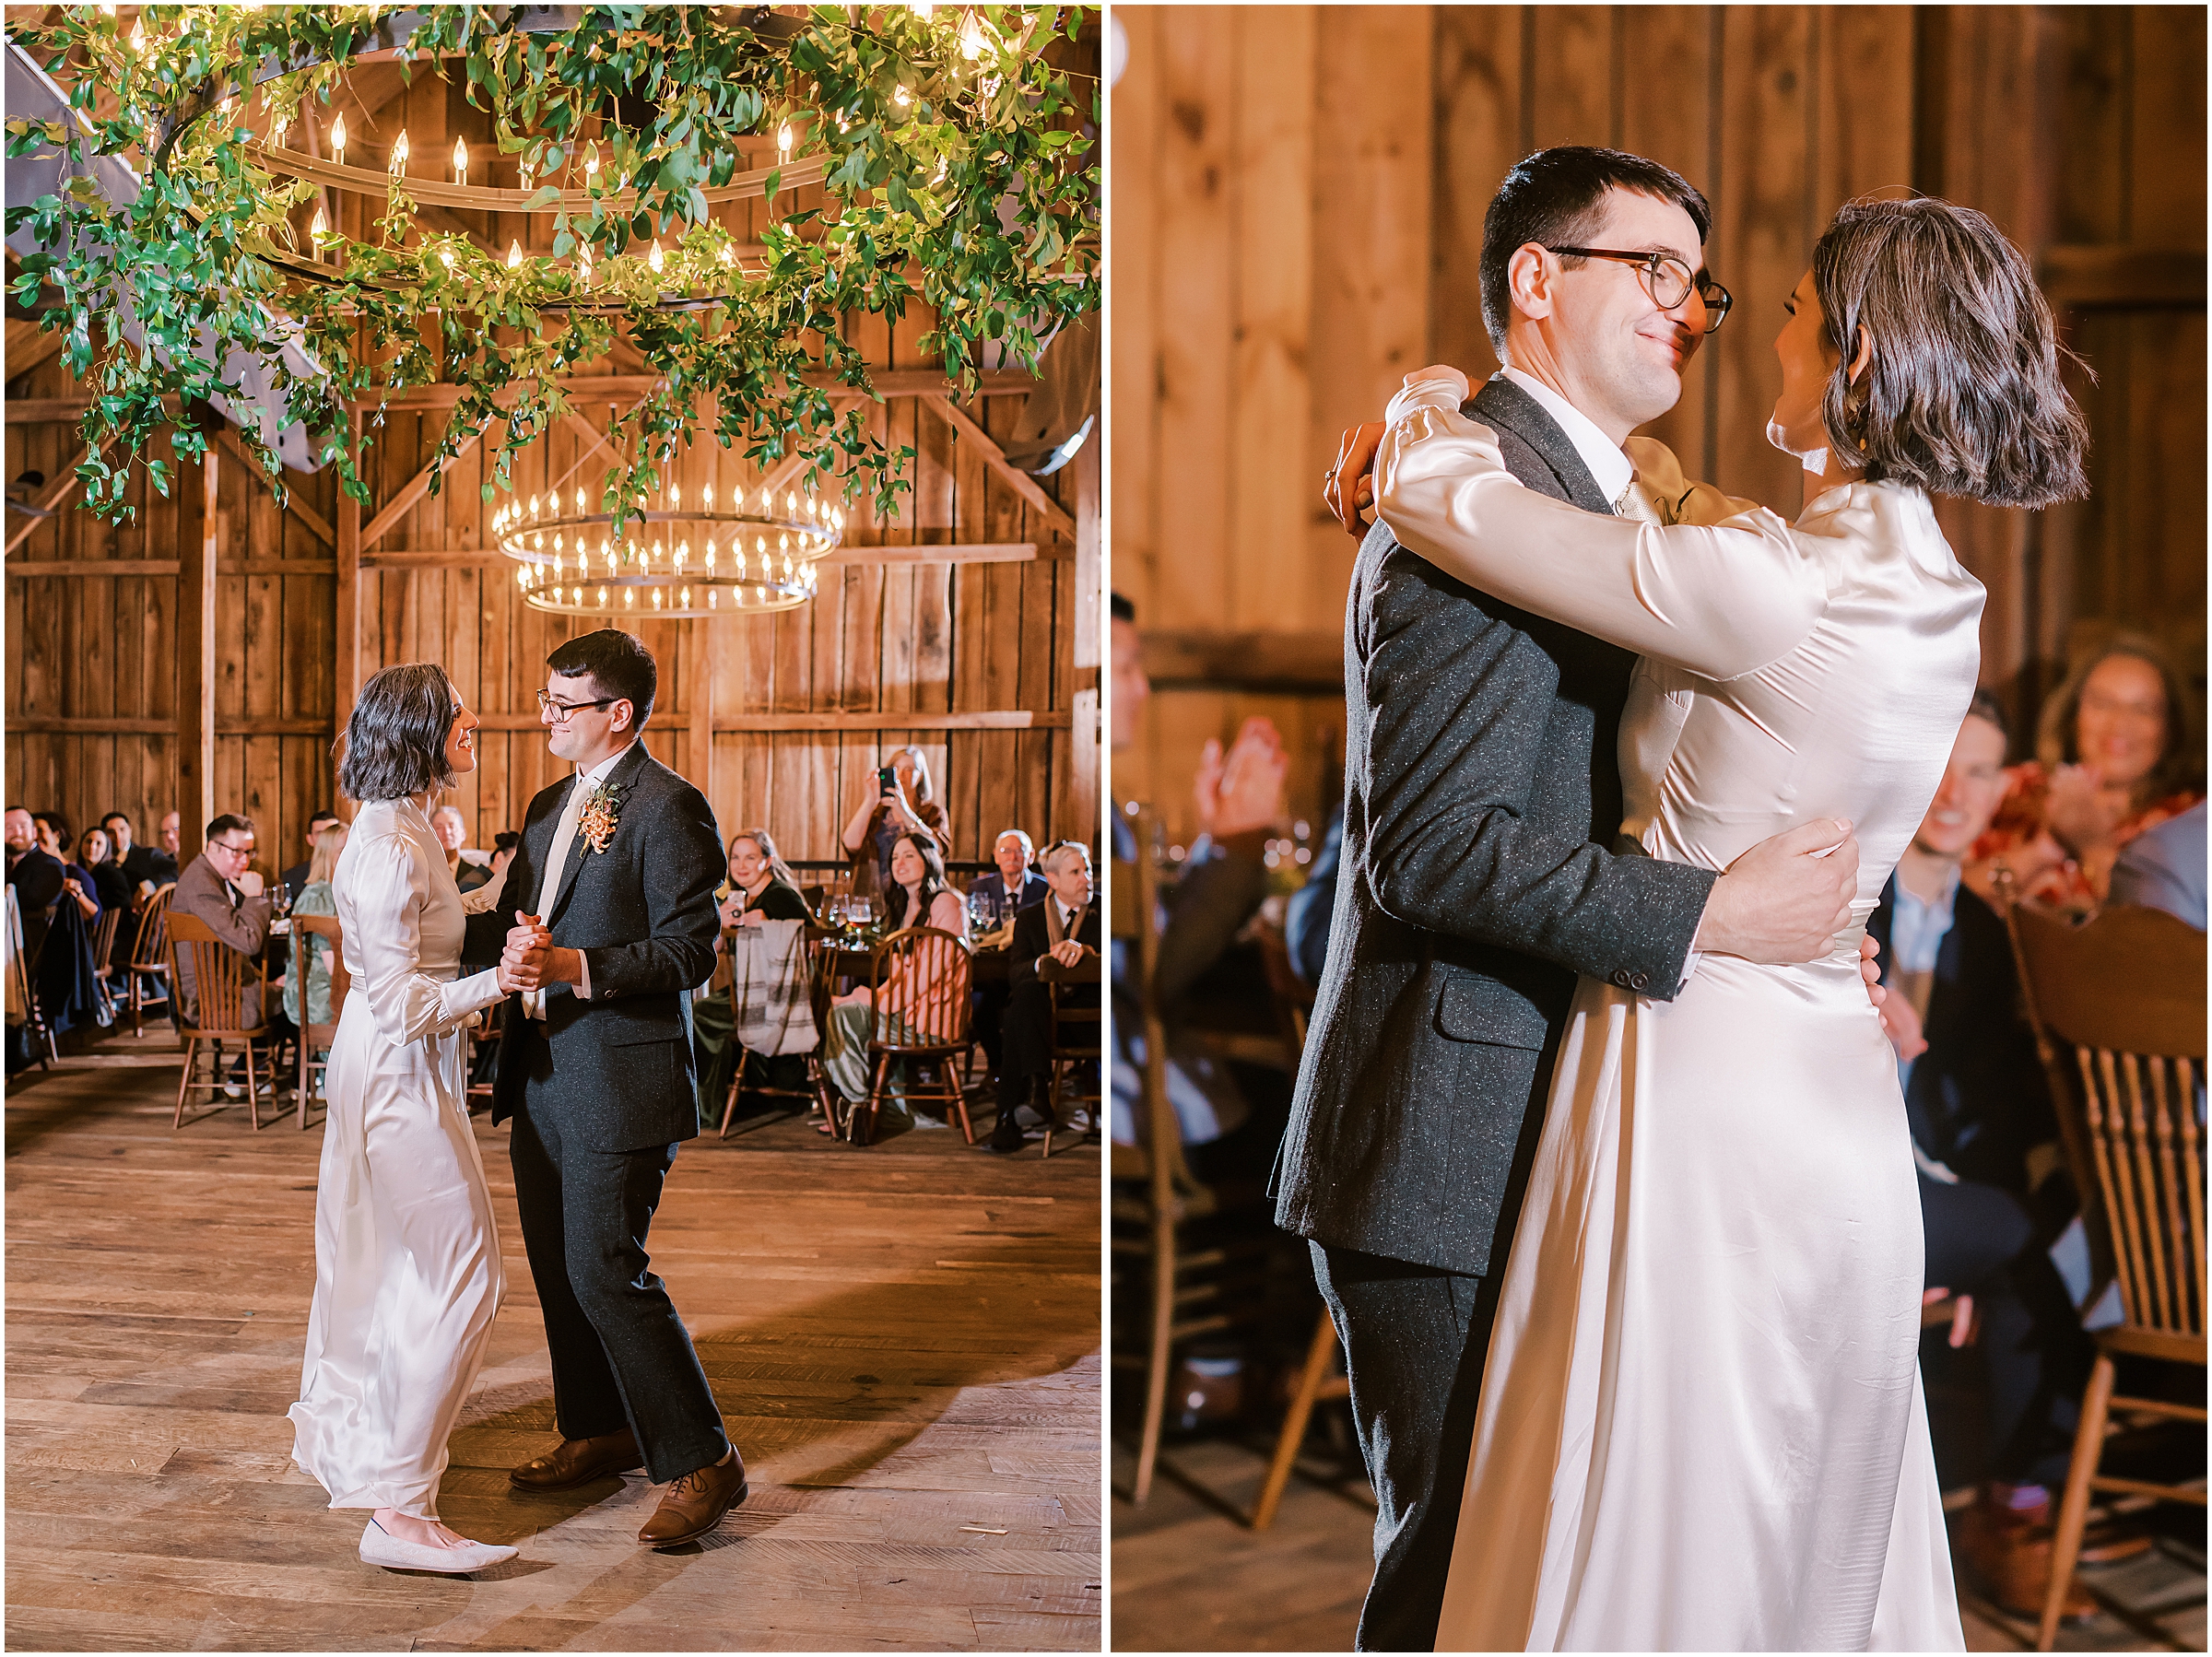 Bride and groom share first dance in Tranquility Farm barn